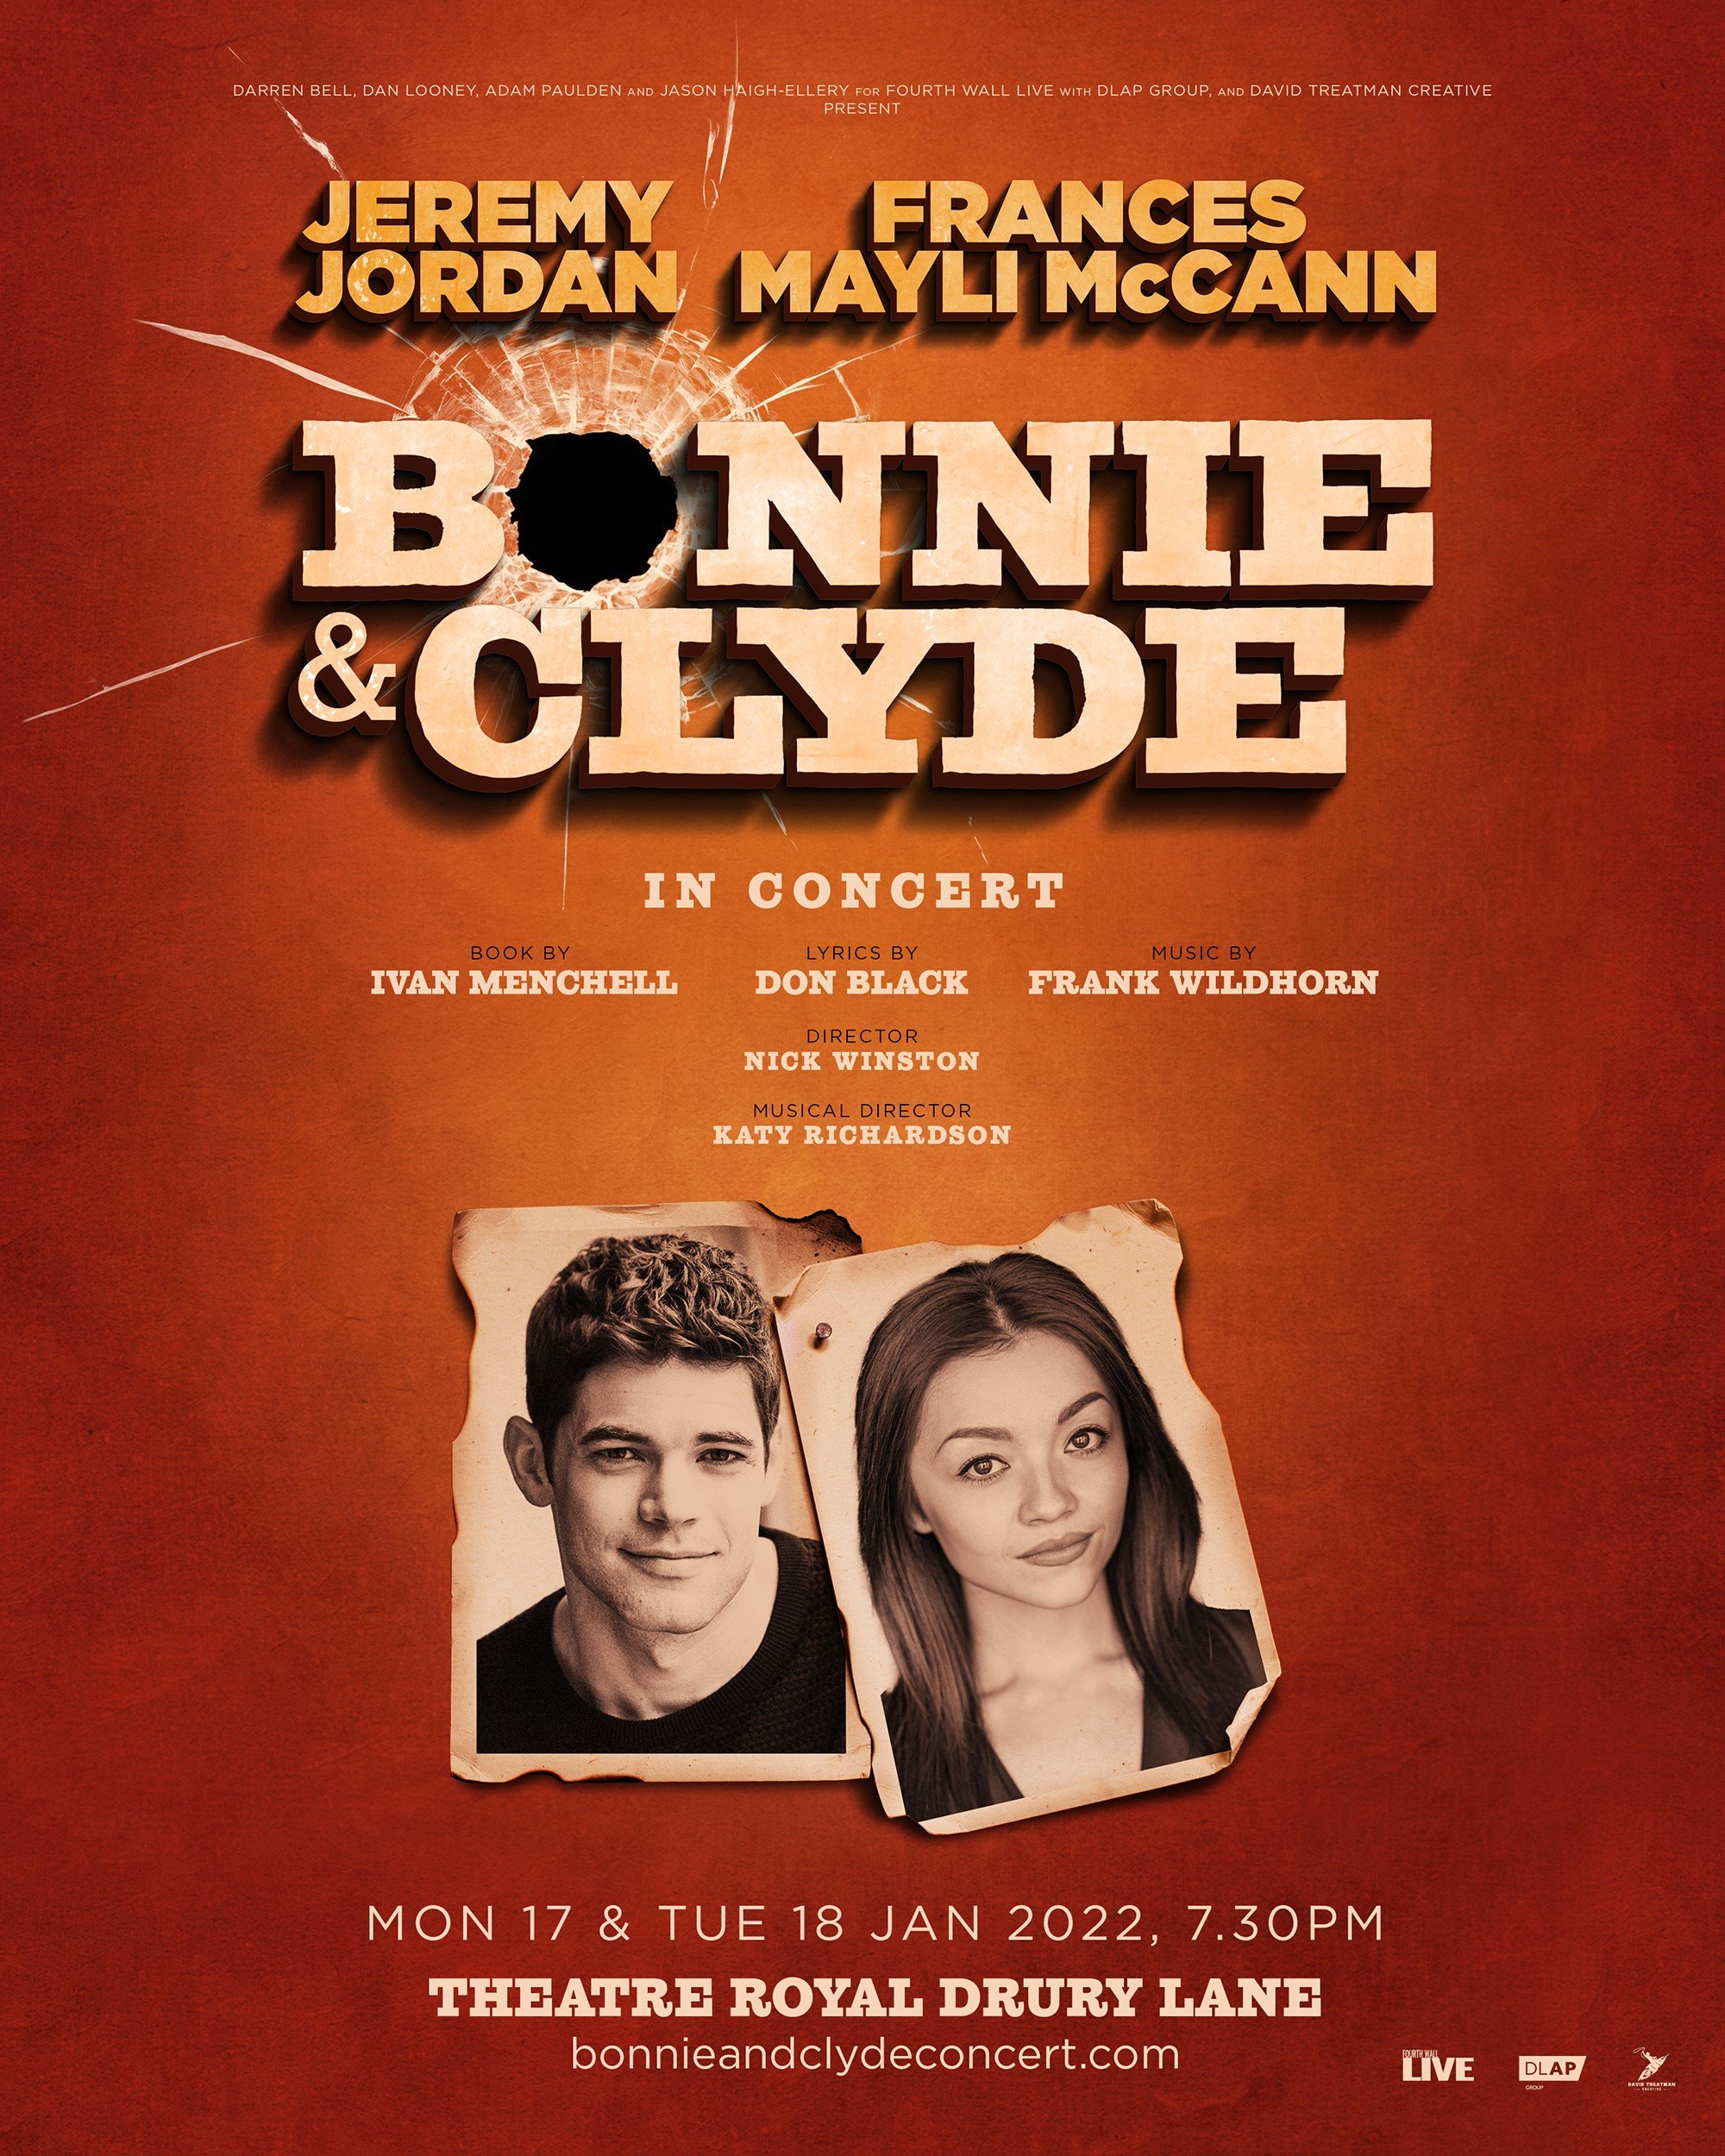 BONNIE-AND-CLYDE-In-Concert-Poster-Image.jpeg